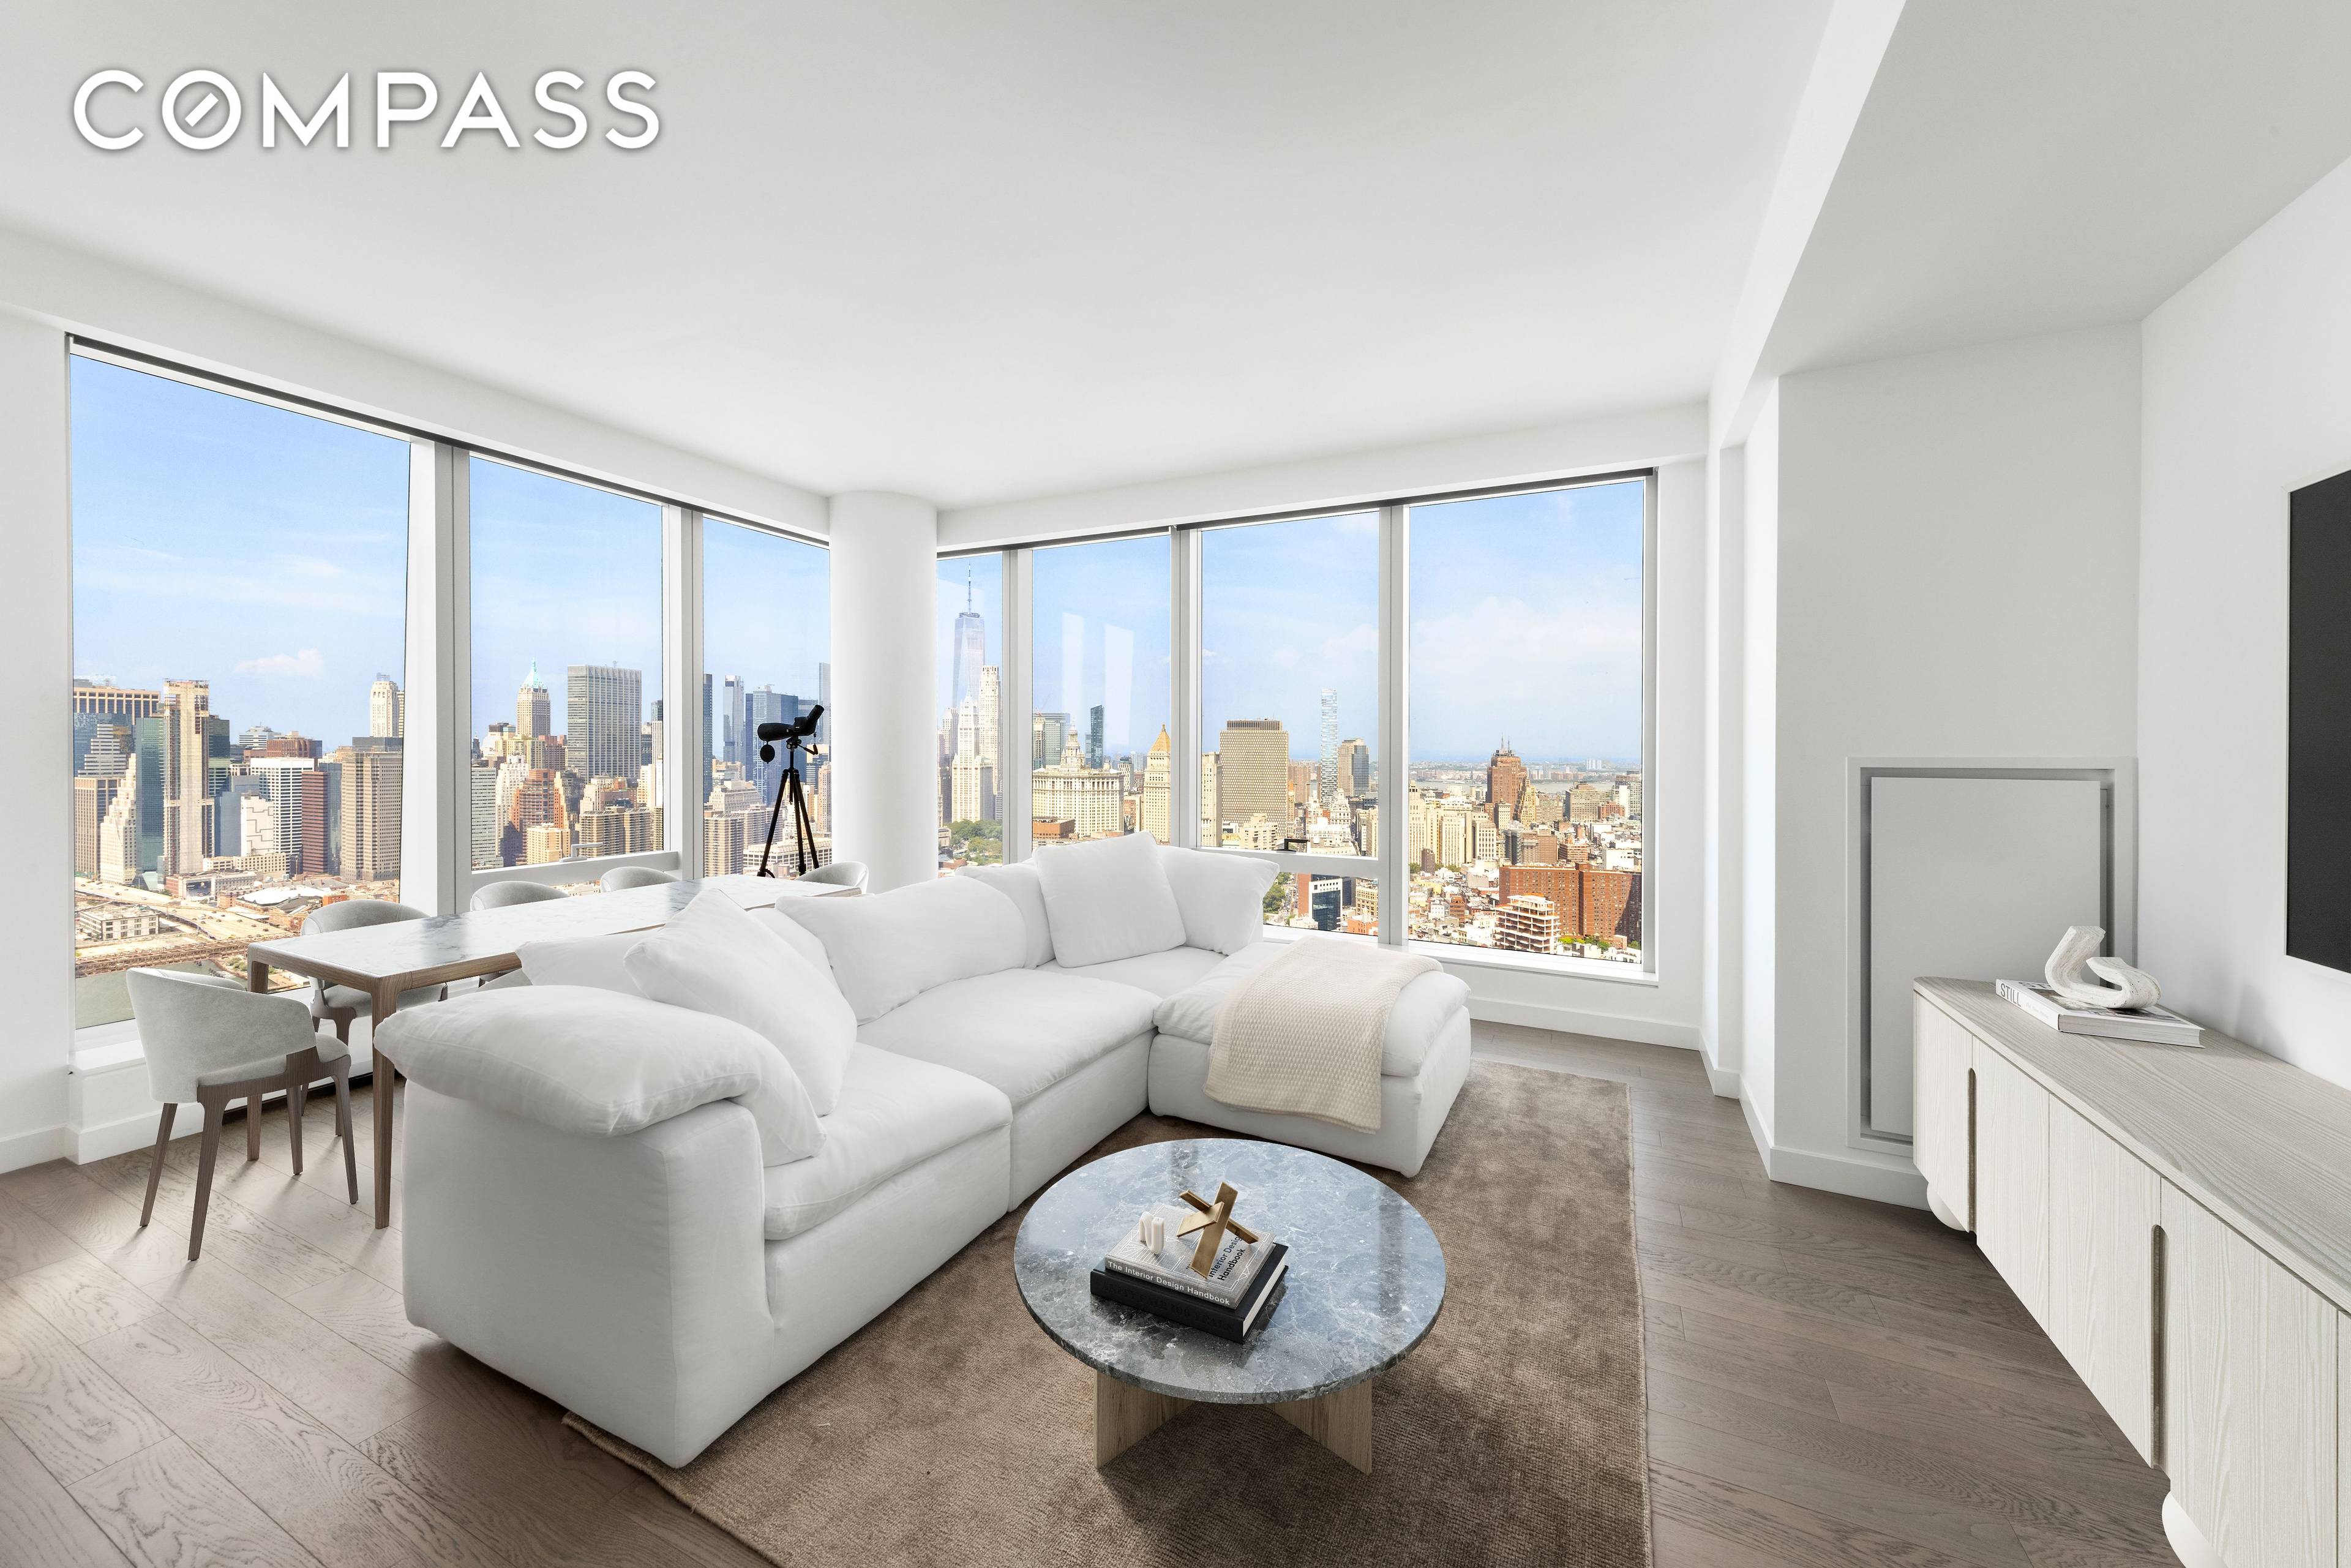 Surround yourself with impeccable designer interiors and other worldly harbor and skyline views in this phenomenal split two bedroom, two bathroom corner residence at the spectacular One Manhattan Square.